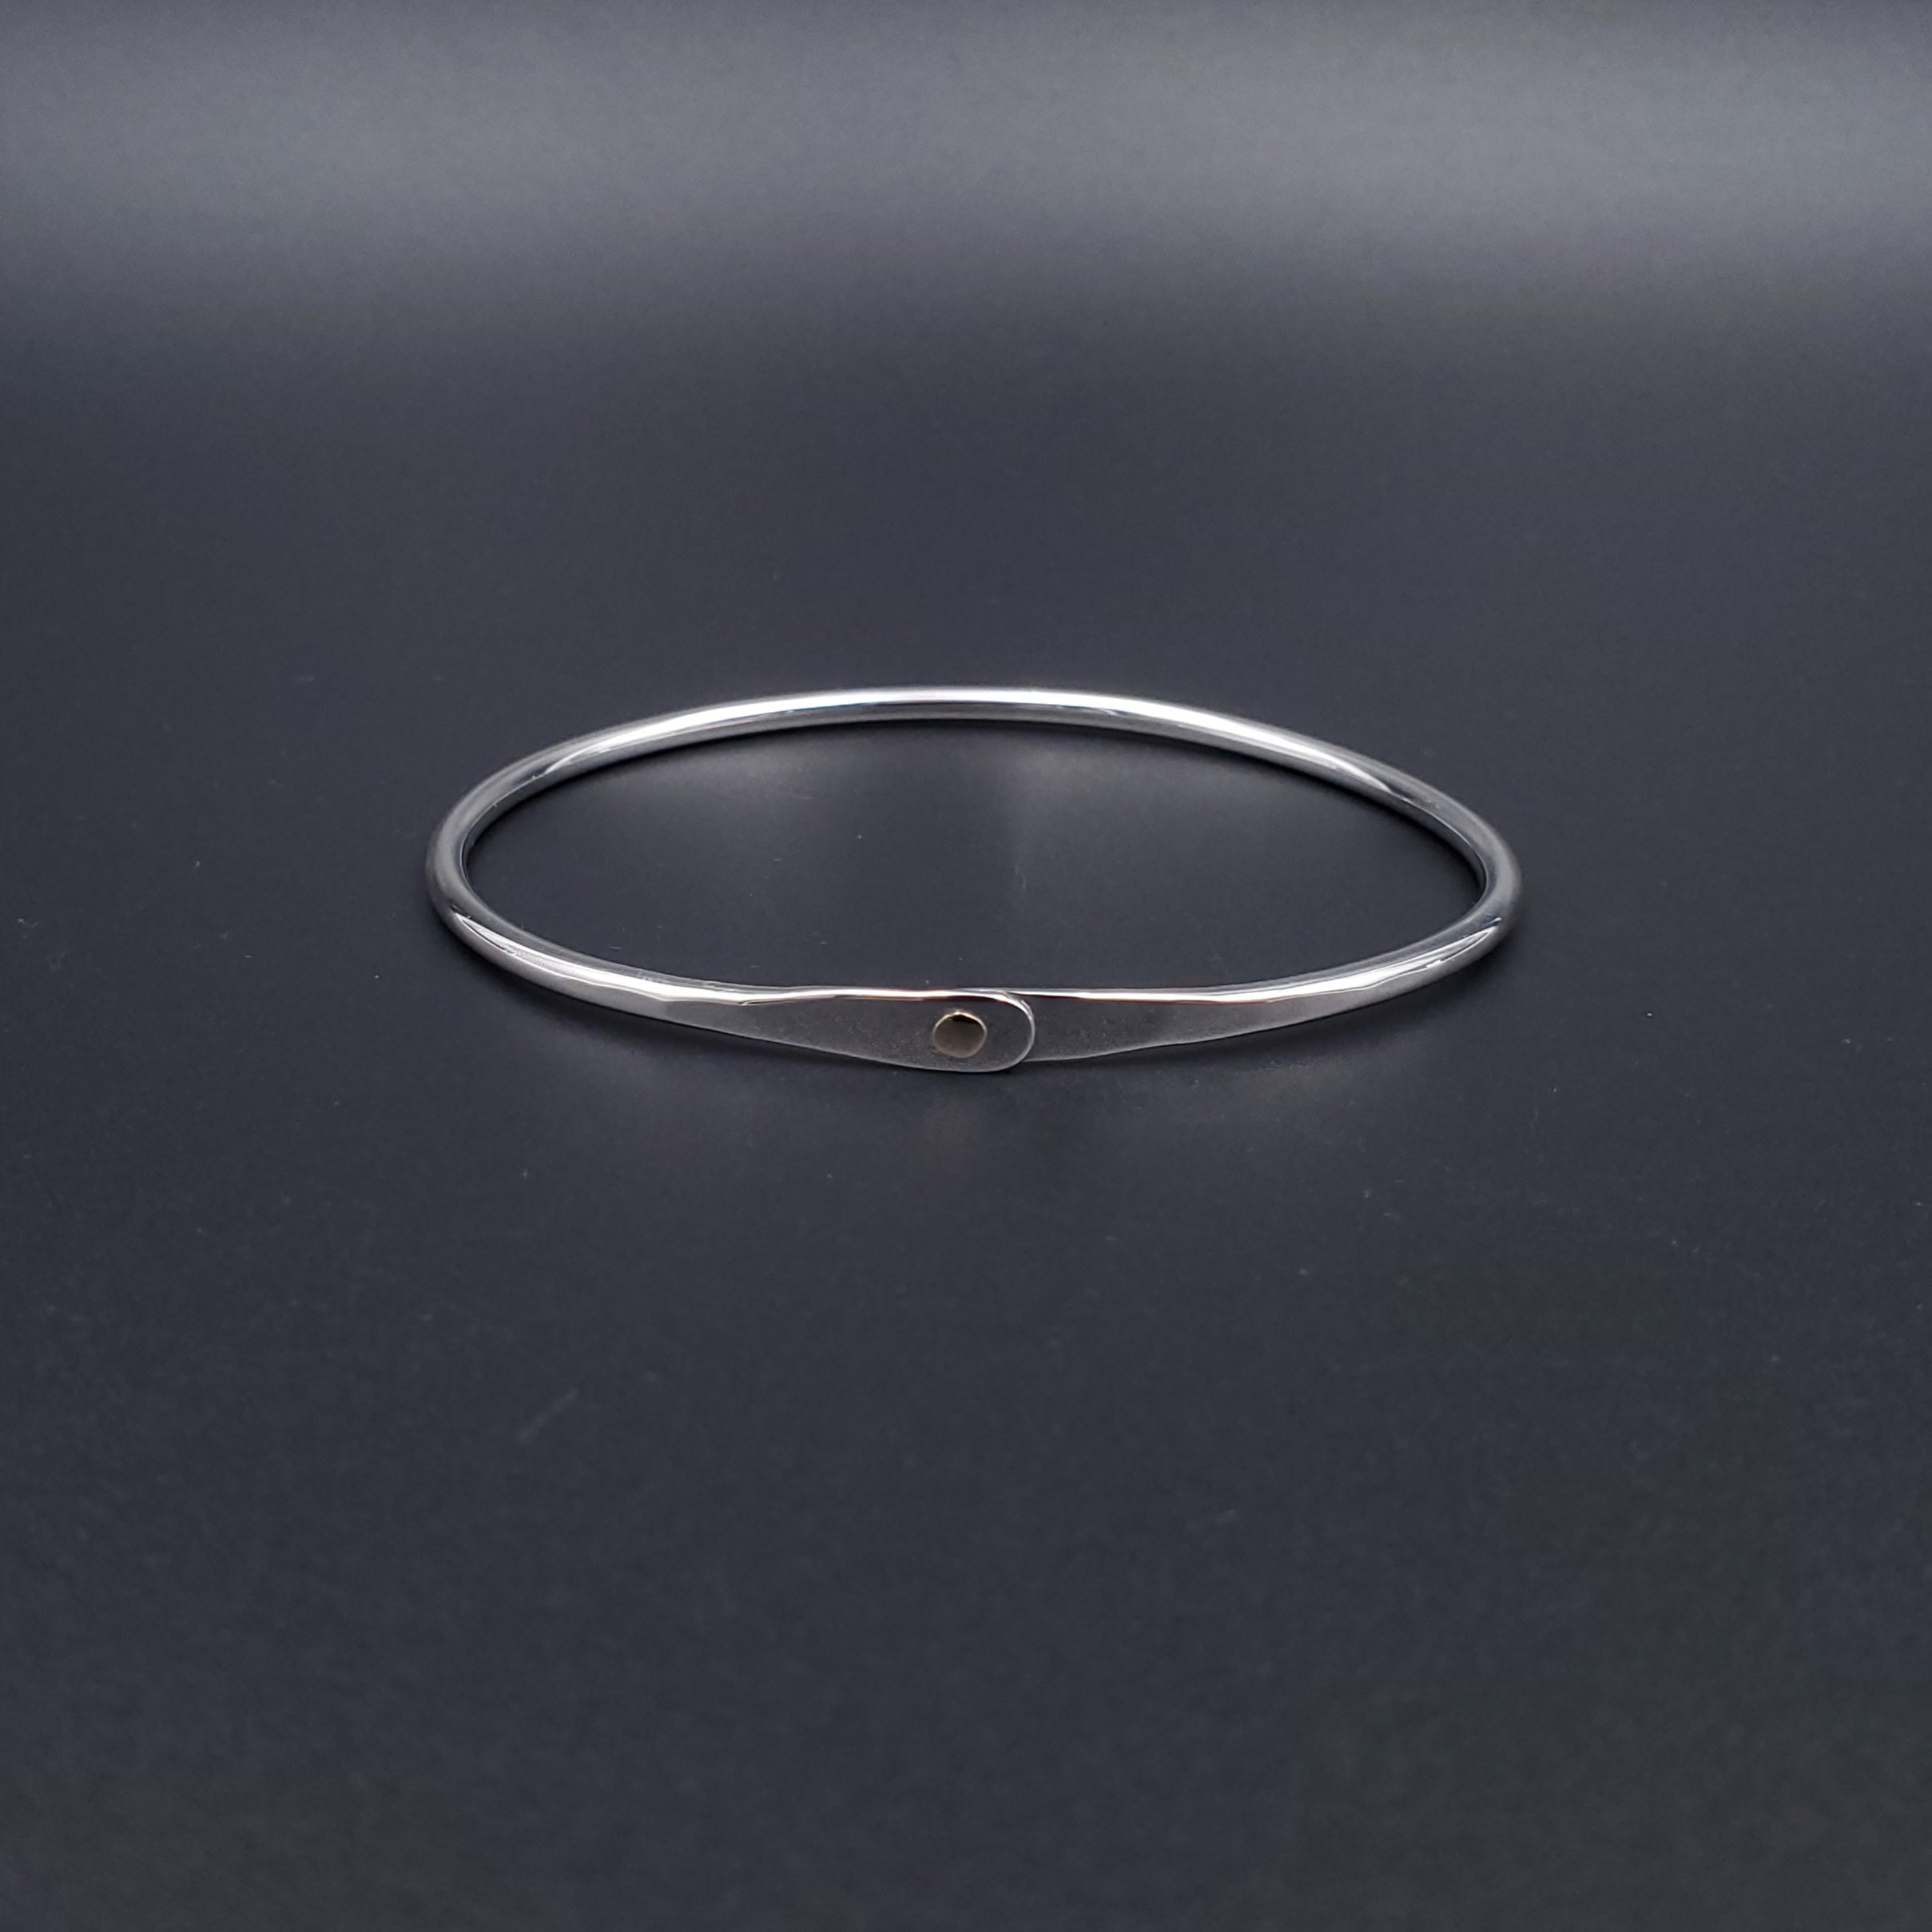 Sterling silver oval bangle bracelet with 14k gold accent